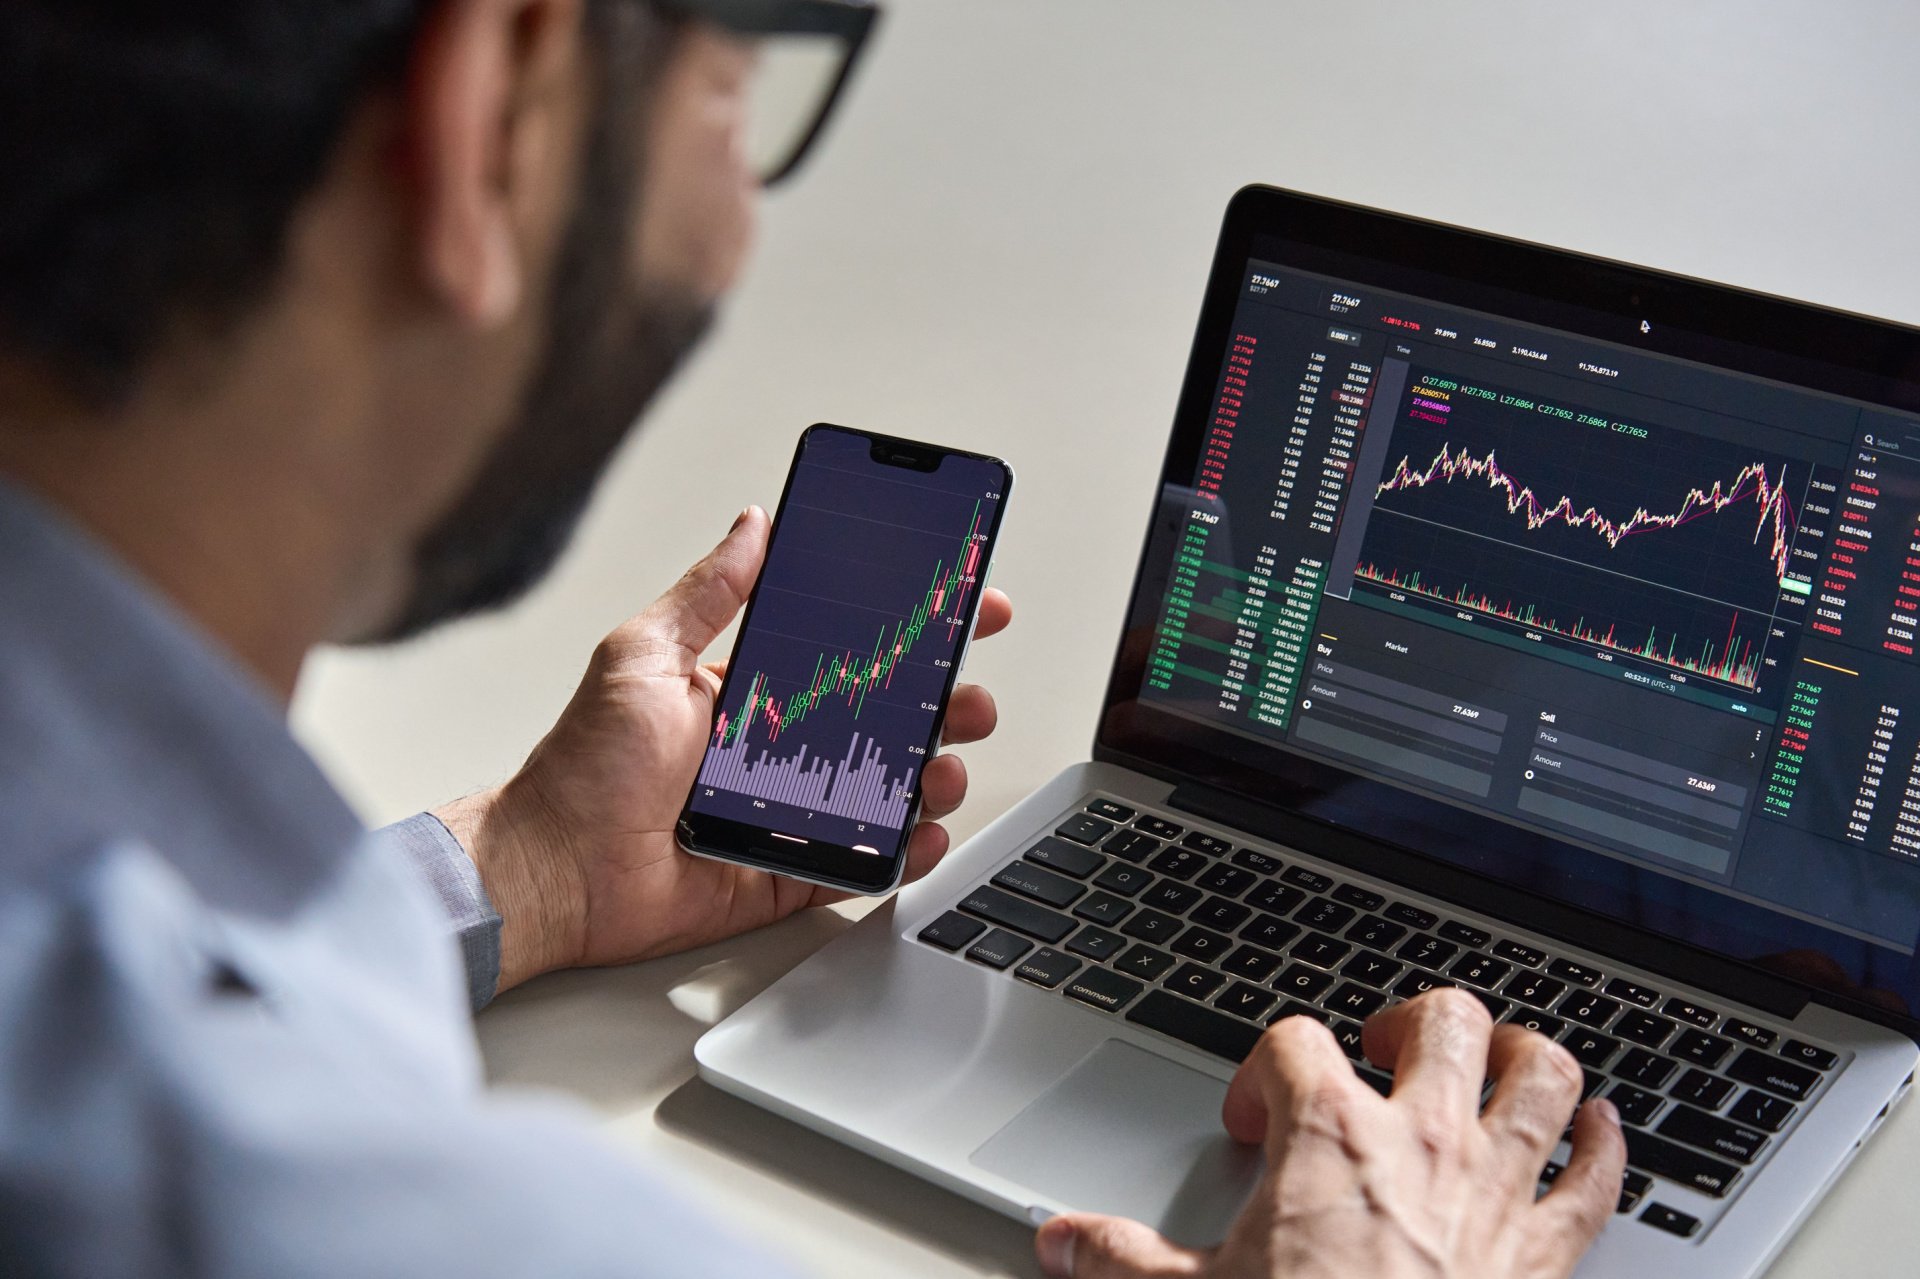 Man staring at stock market performance on iphone 